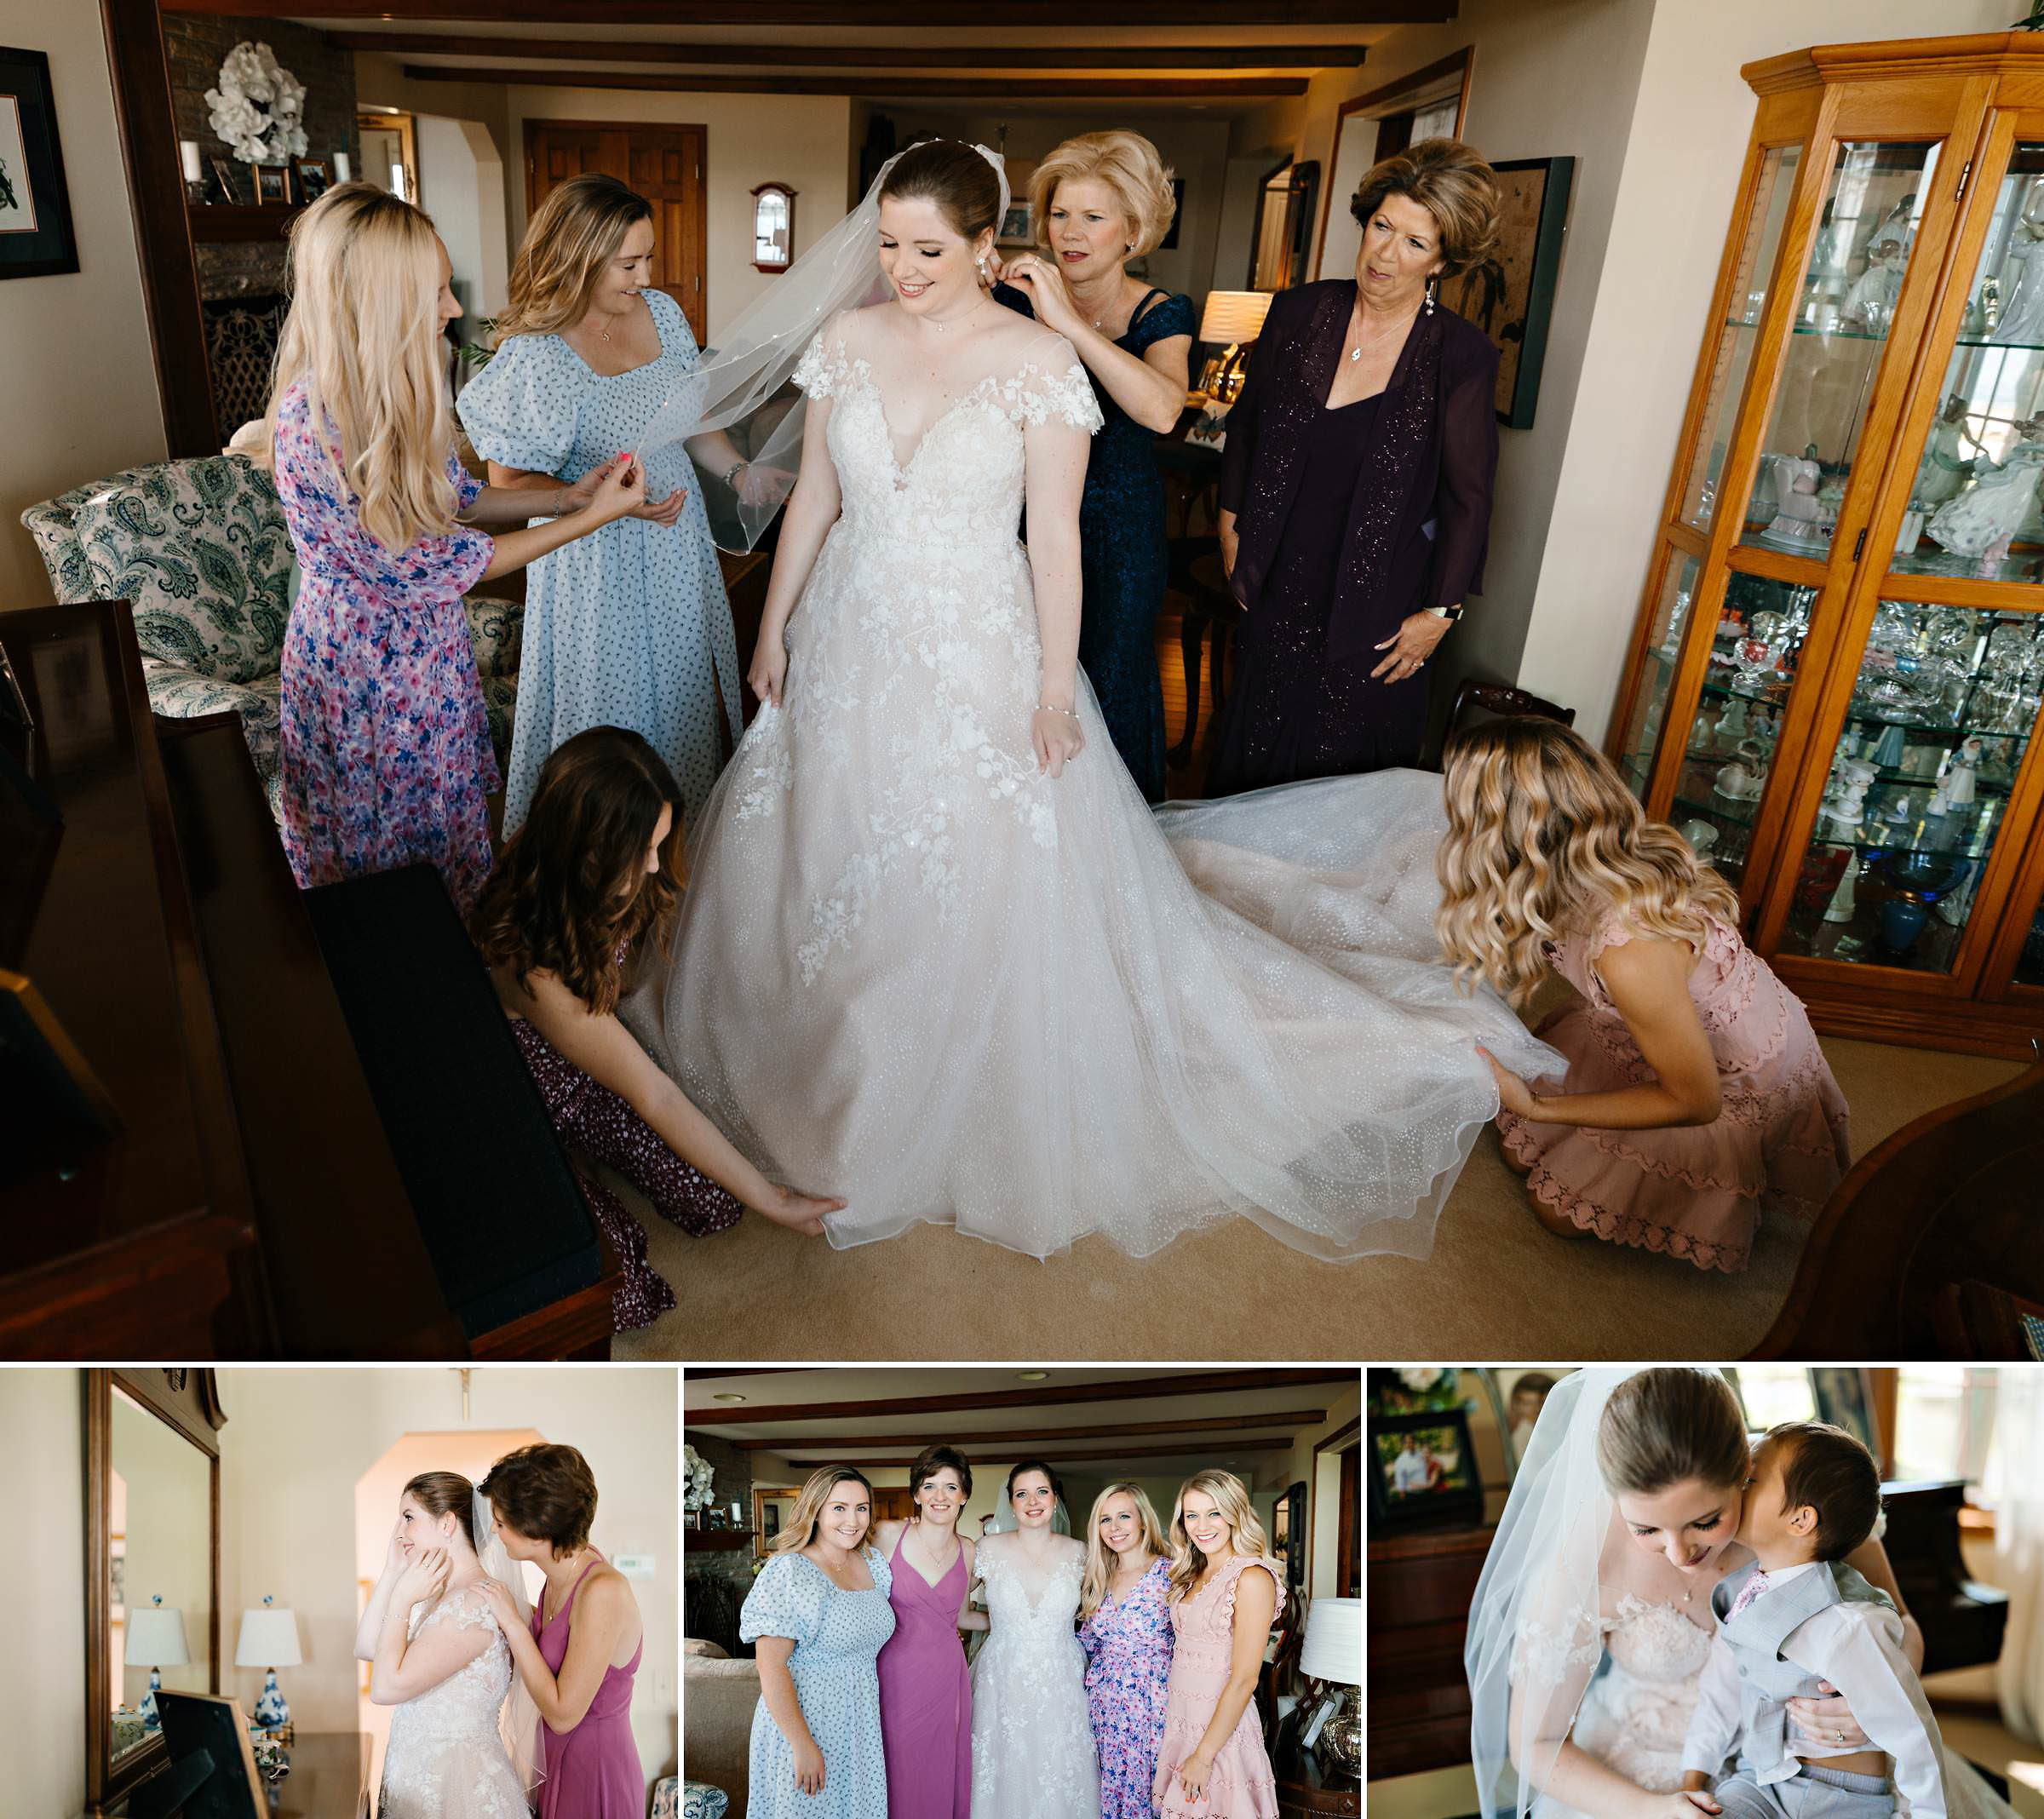 Bride's loved ones are helping her get ready, adjusting her dress; bride and bridesmaid are looking in mirror; the bride and bridesmaids take a group photo; ring bearer kisses the bride on cheek before the ceremony by Detroit Wedding Photographer Michele Maloney